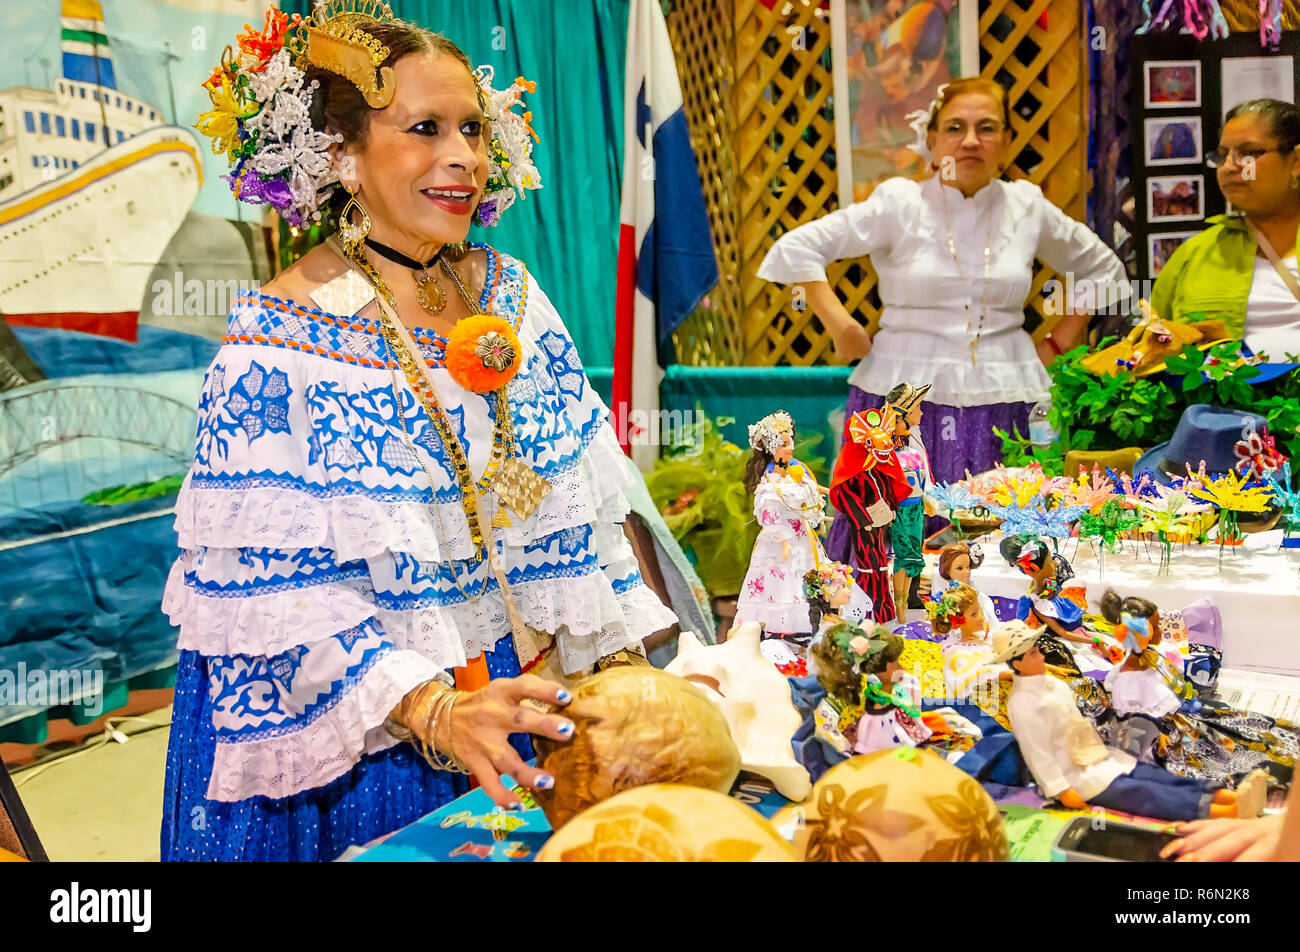 A Panamanian woman sells souvenirs at the 34th annual Mobile International Festival, Nov. 17, 2018, in Mobile, Alabama. The festival featured exhibits Stock Photo